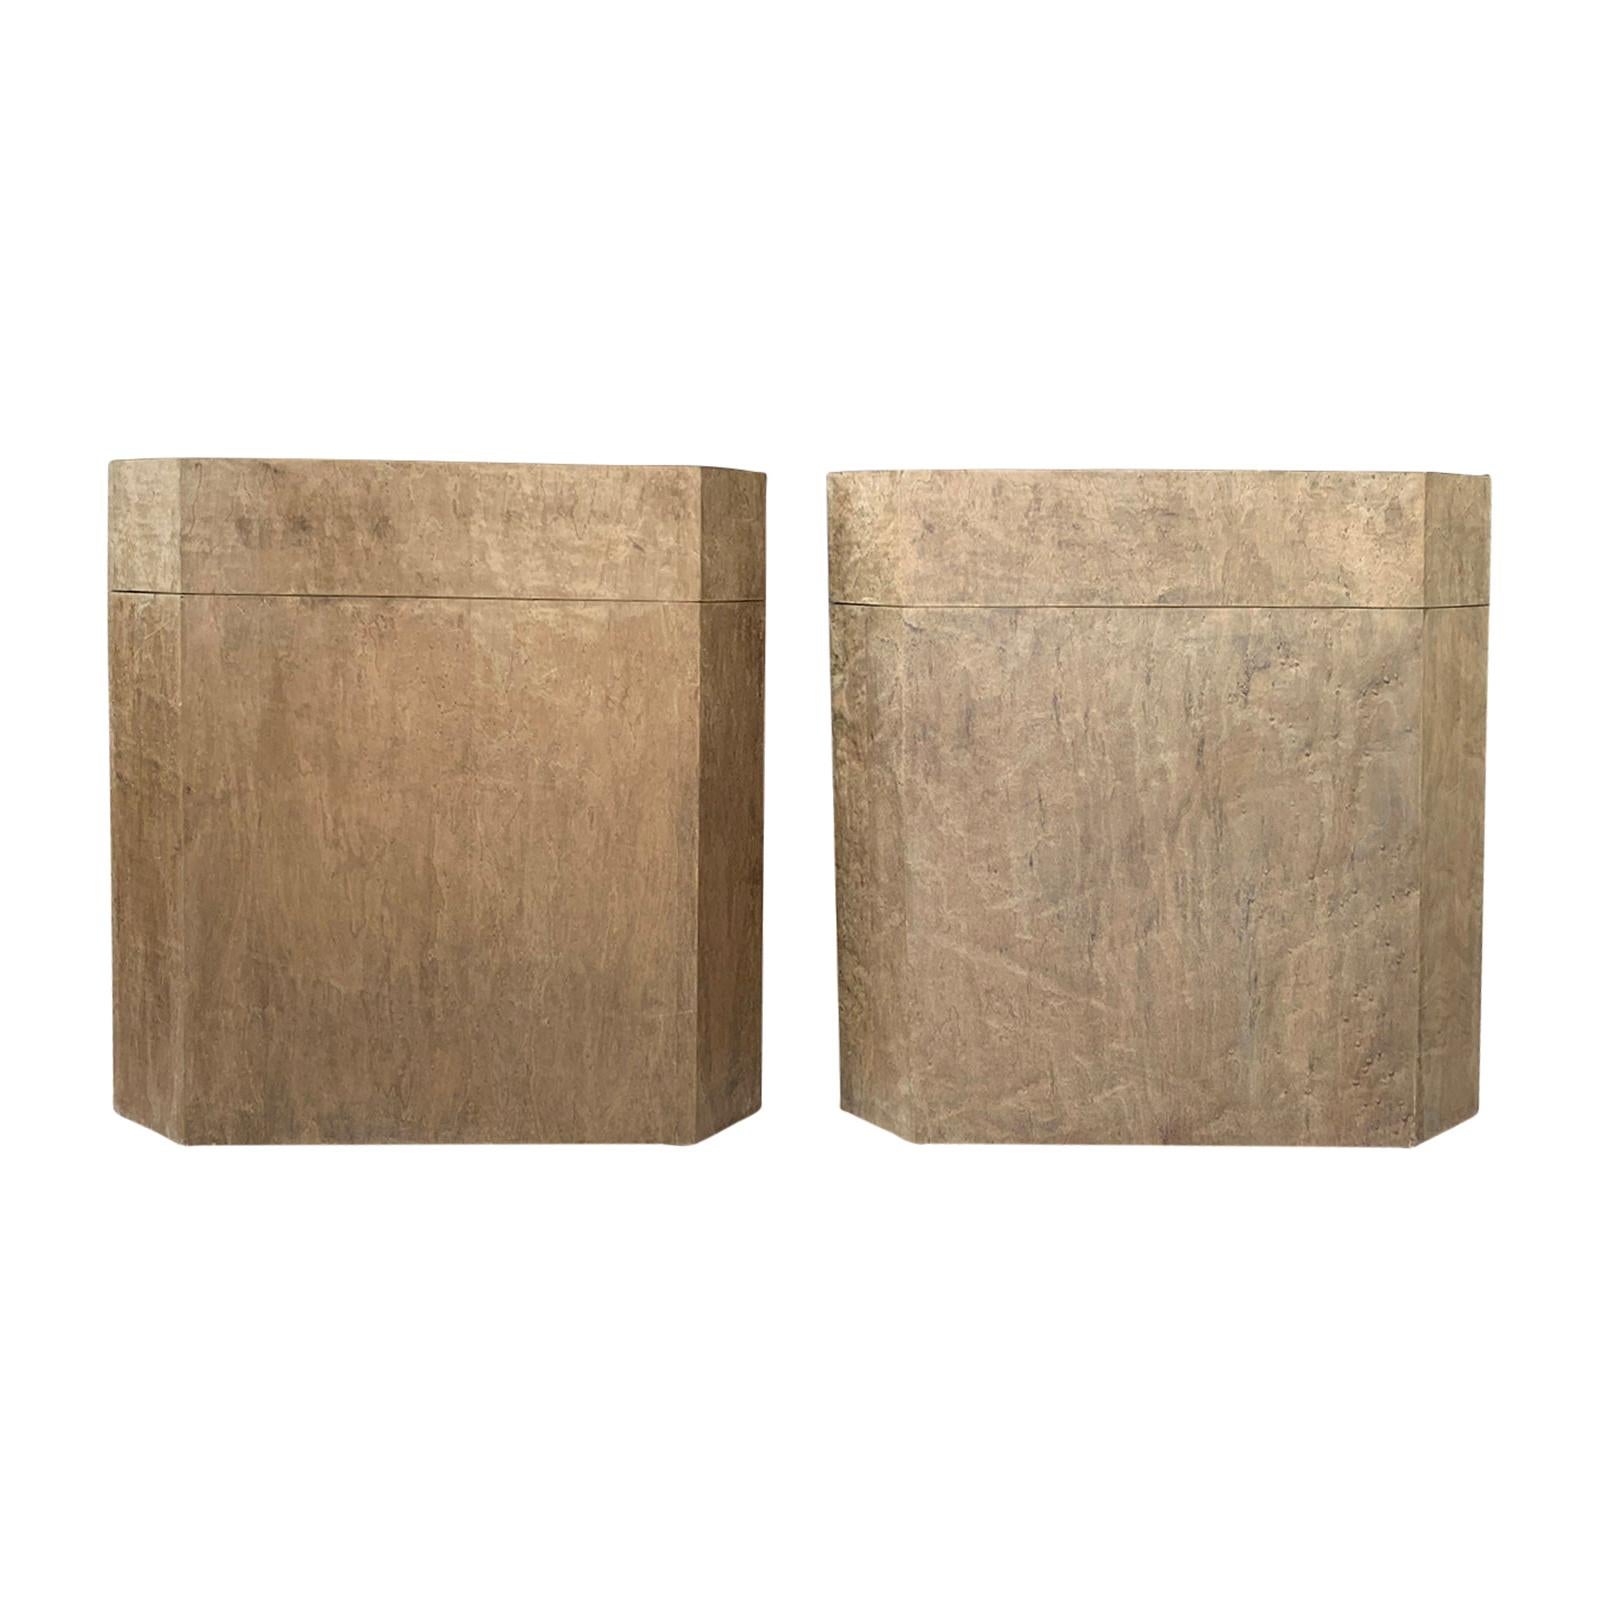 Pair of 20th Century Burled Maple Boxes as Side Tables by Worrells Interiors